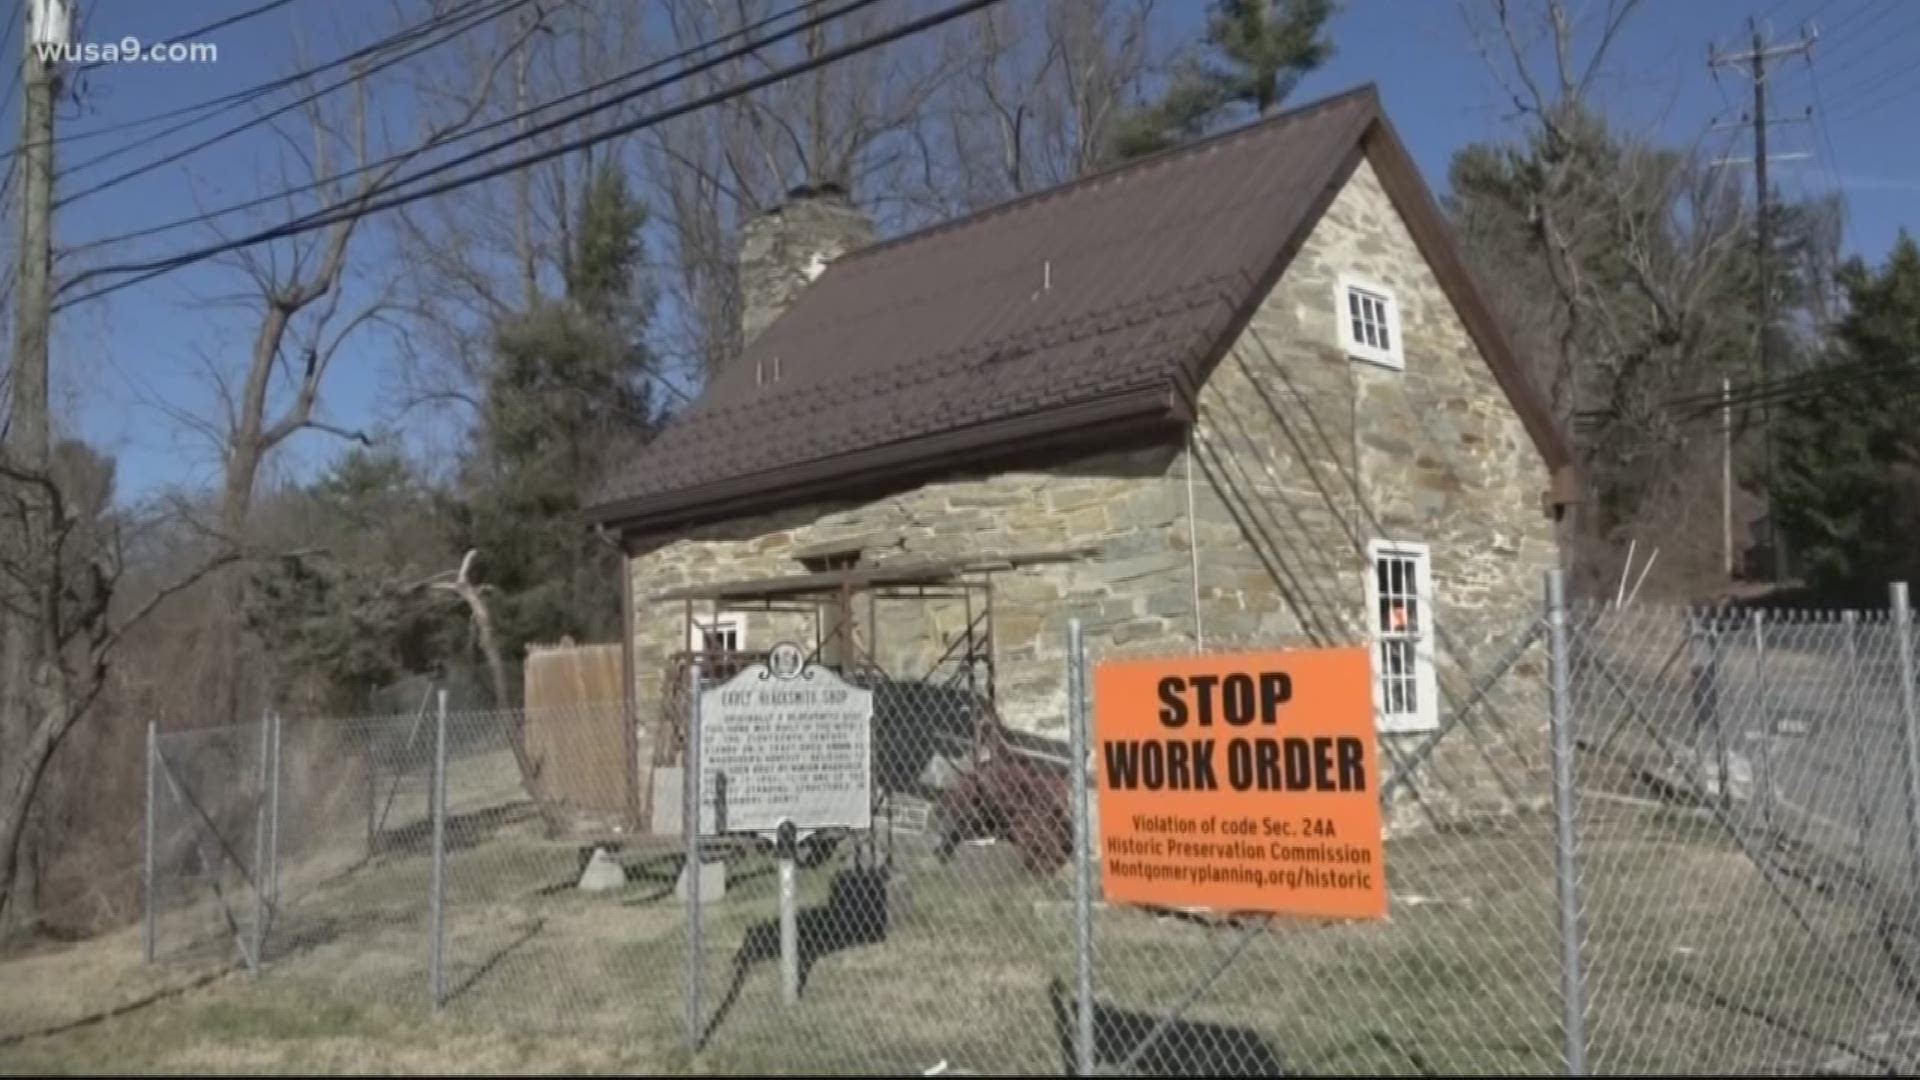 Now the Historic Preservation Commission has issued a stop work order on the house.